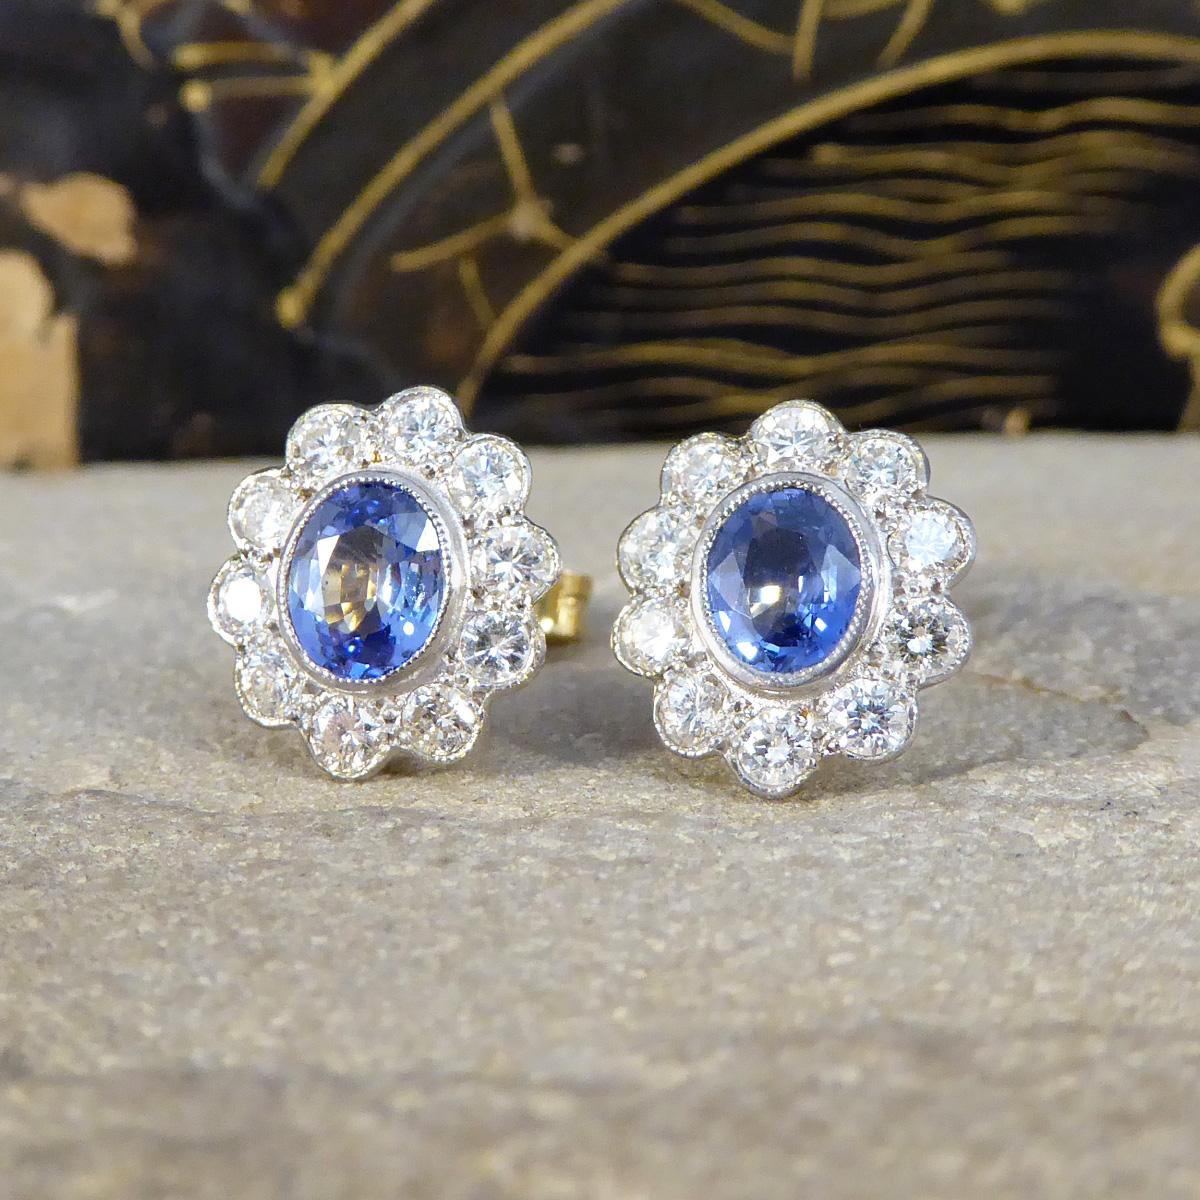 Edwardian Inspired Sapphire and Diamond Cluster Earrings in 18ct Gold 1